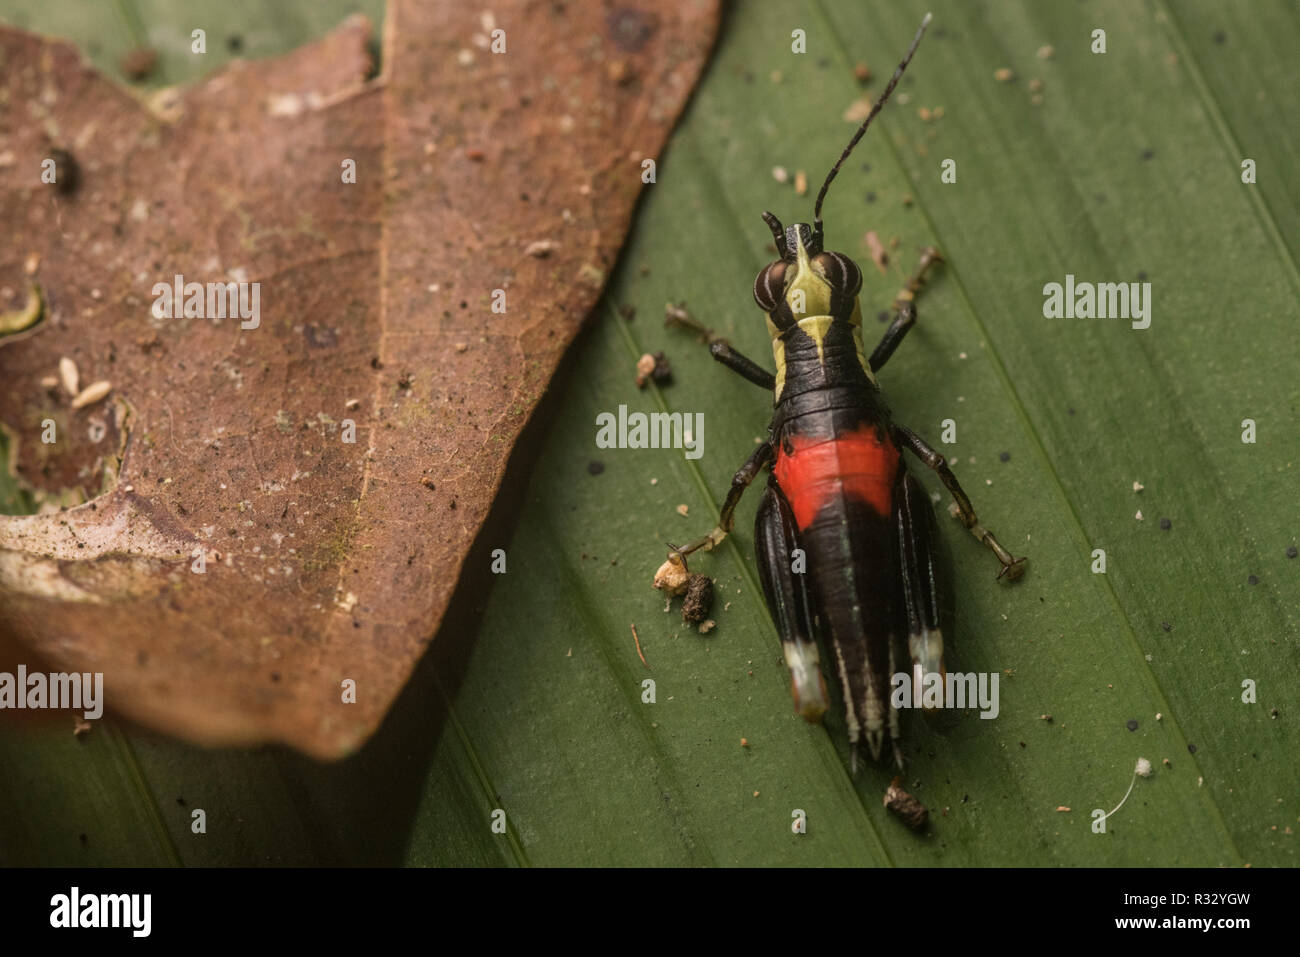 A colorful grasshopper from Los Amigos, Peru. The bright colors likely signify its distaste to predator. Stock Photo